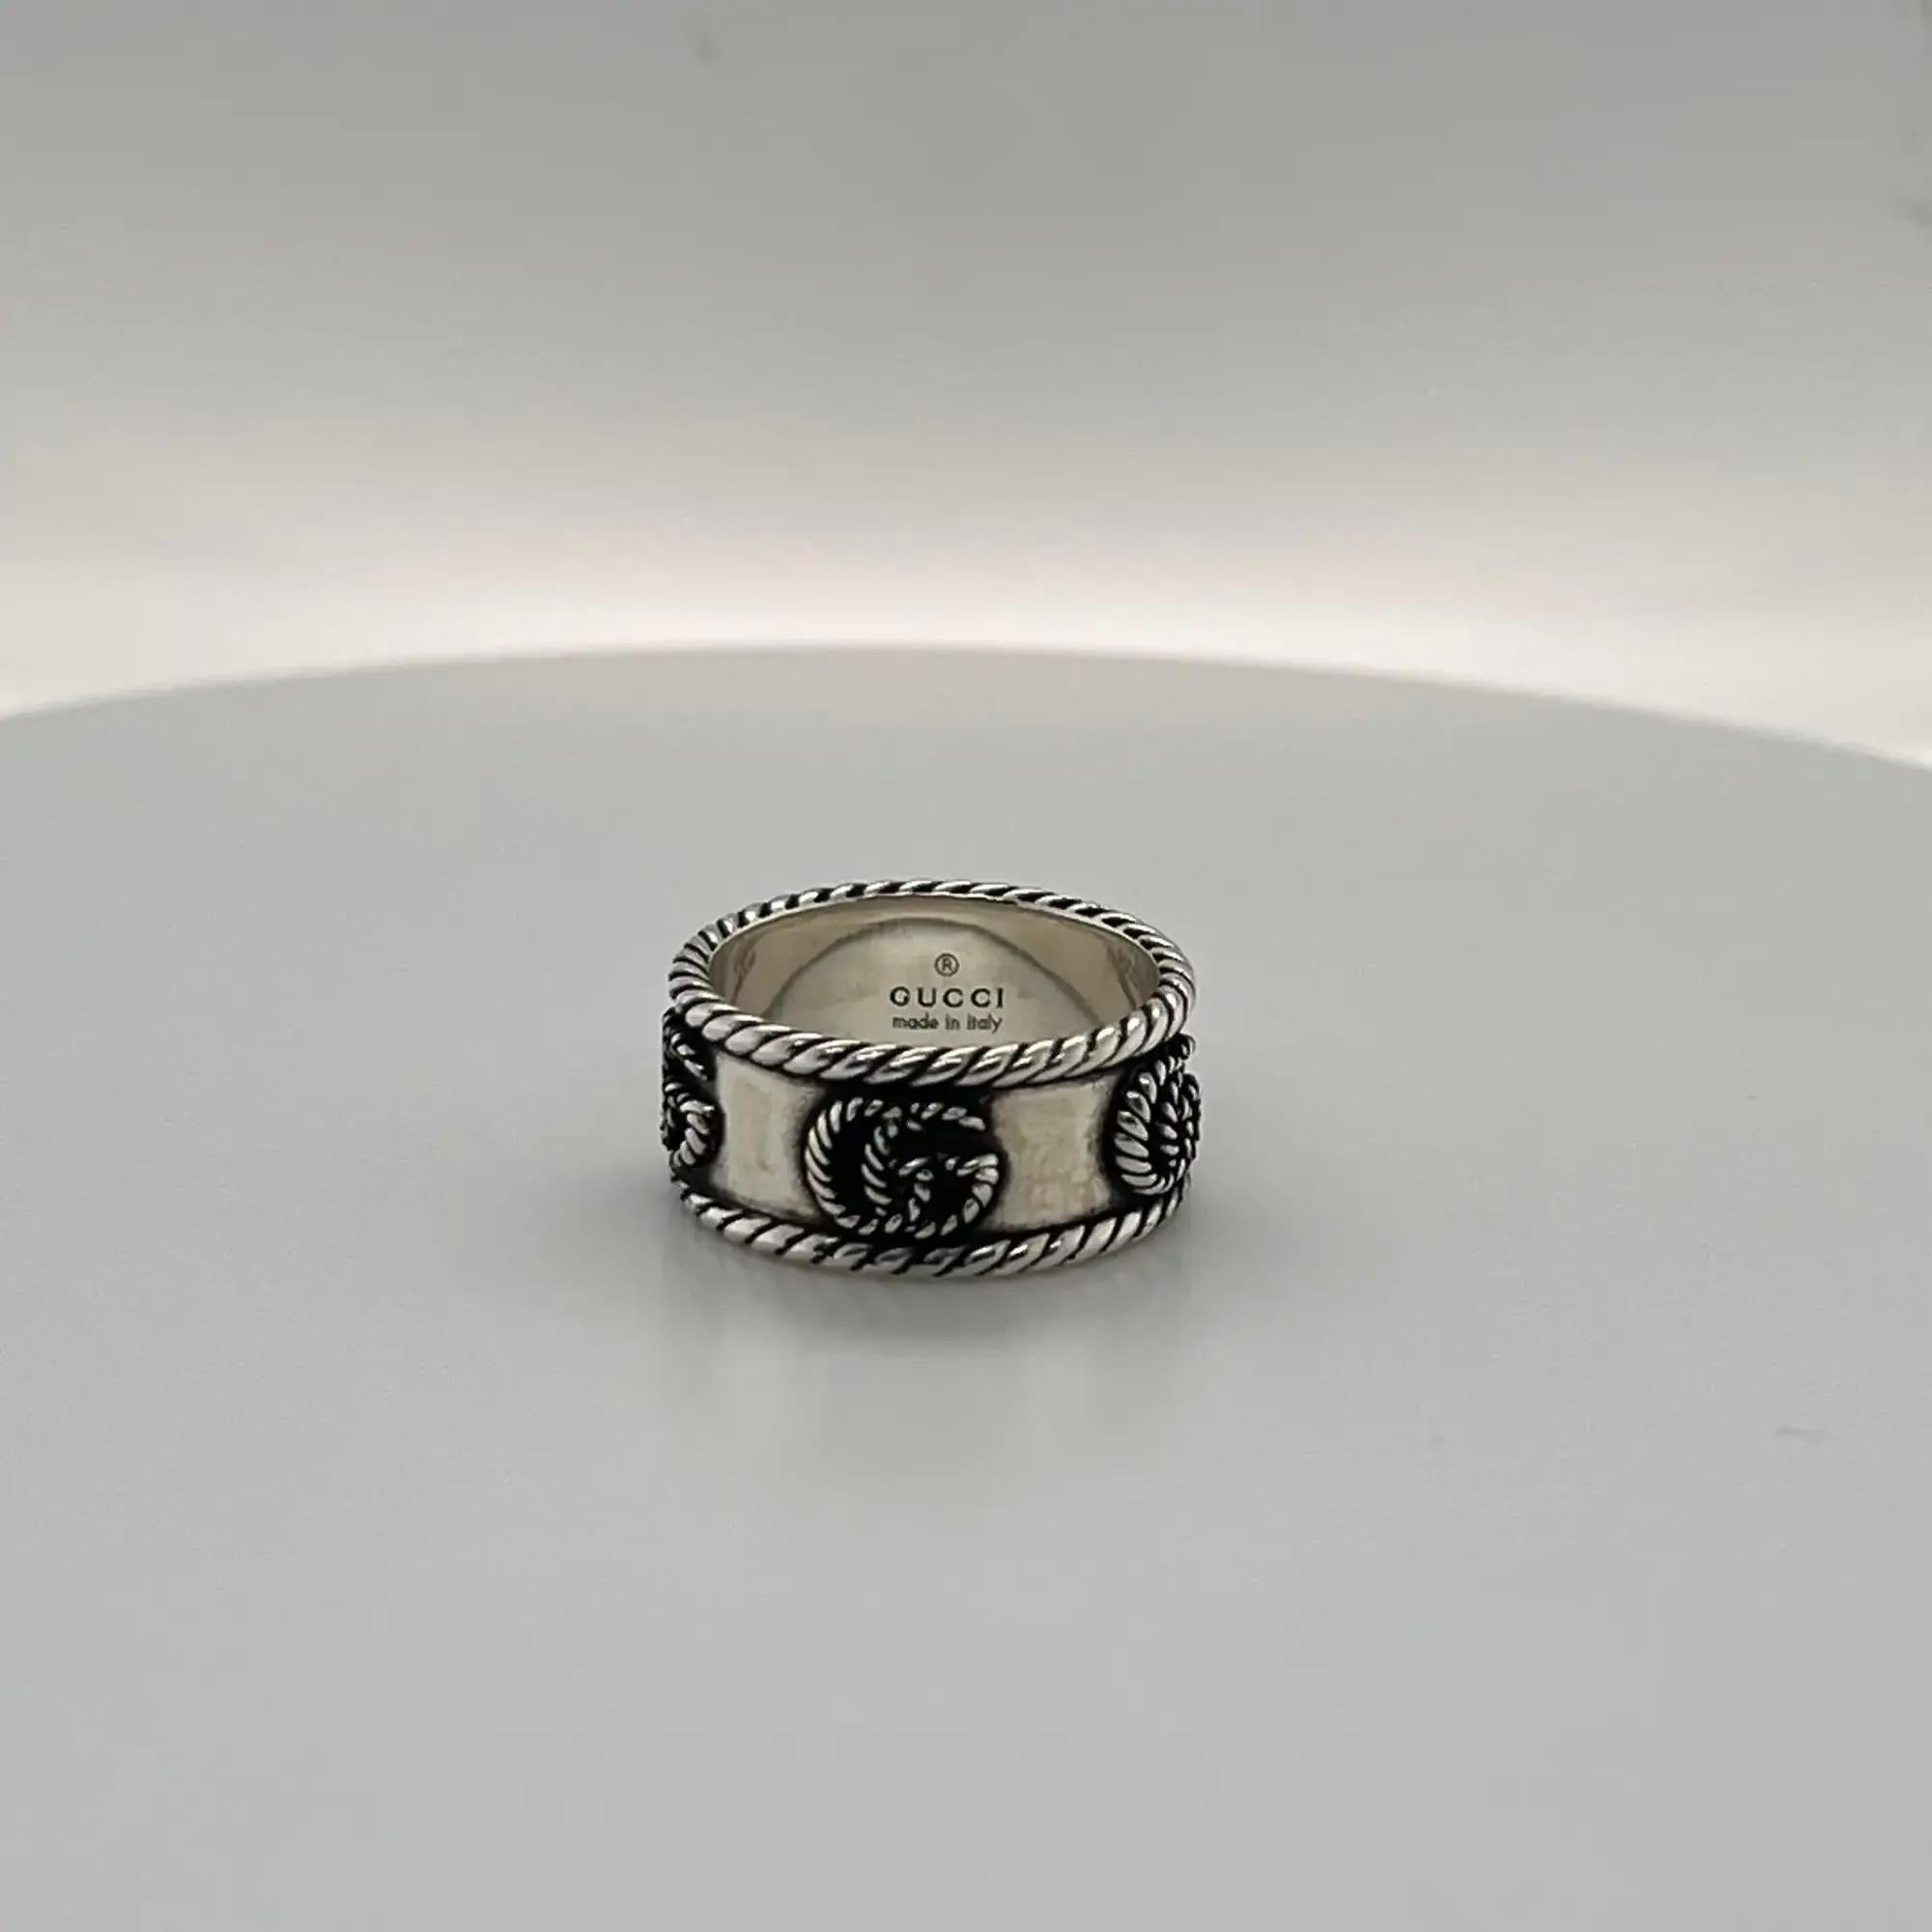 Beautiful GUCCI interlocking double G twisted, torchon design on a thin band ring. Expertly made and intricately designed in 925 sterling silver with an aged finish. Ring size 12, US 6. Band width: 8.8mm. Total weight: 5.82 grams. Made in Italy.